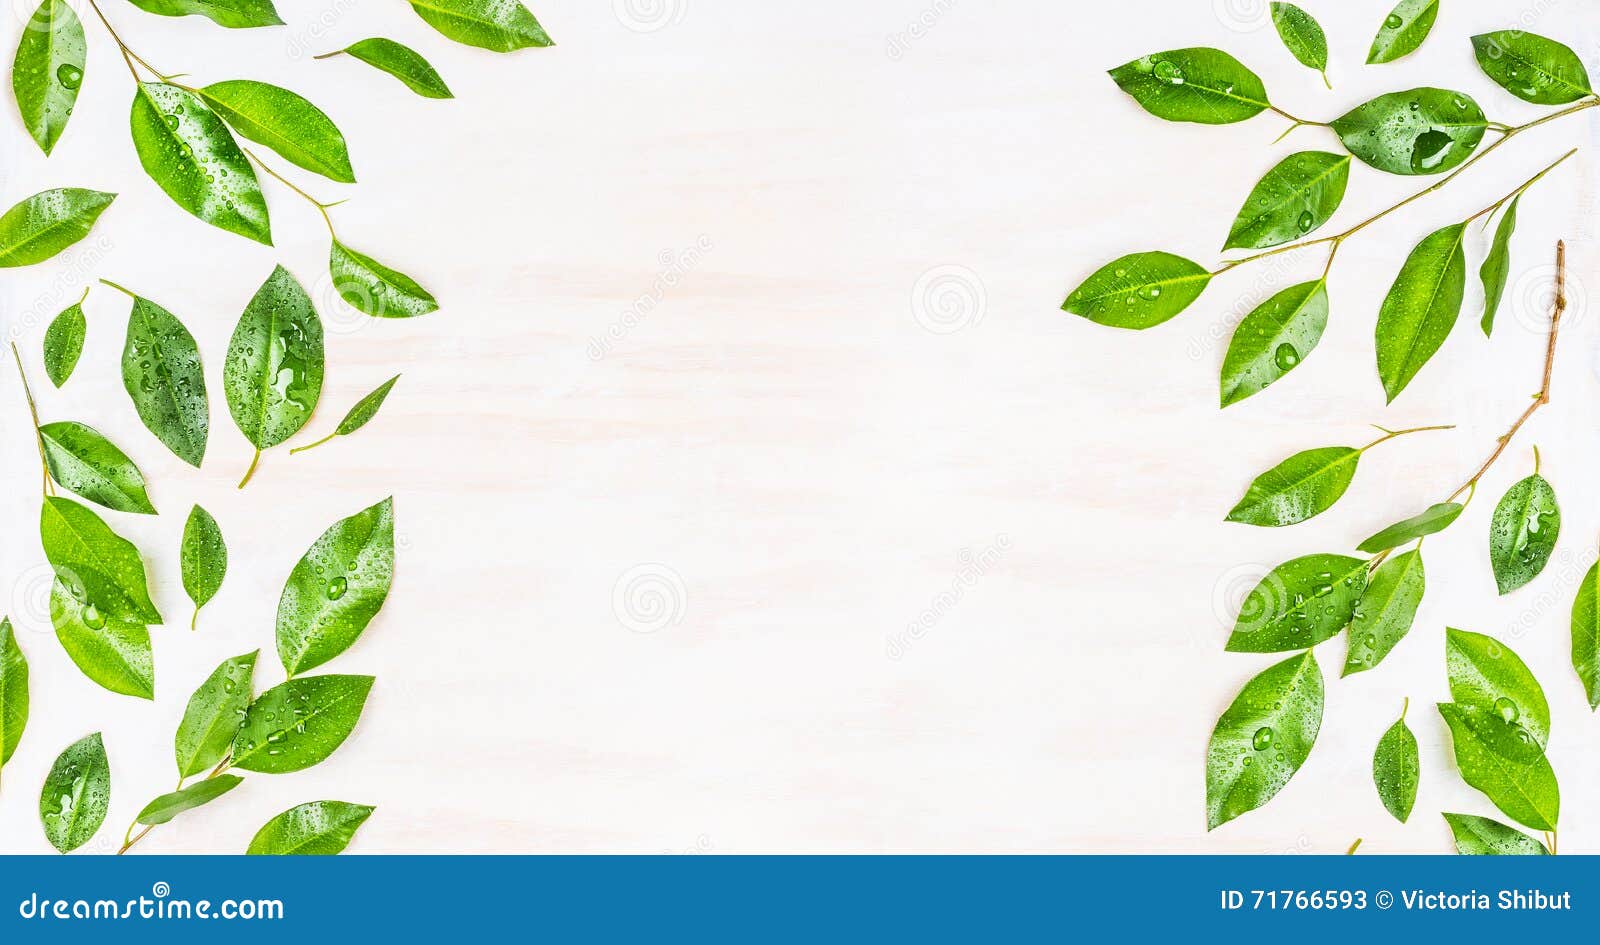 Border Or Banner  Of Green  Leaves  With Dew Drops On White 